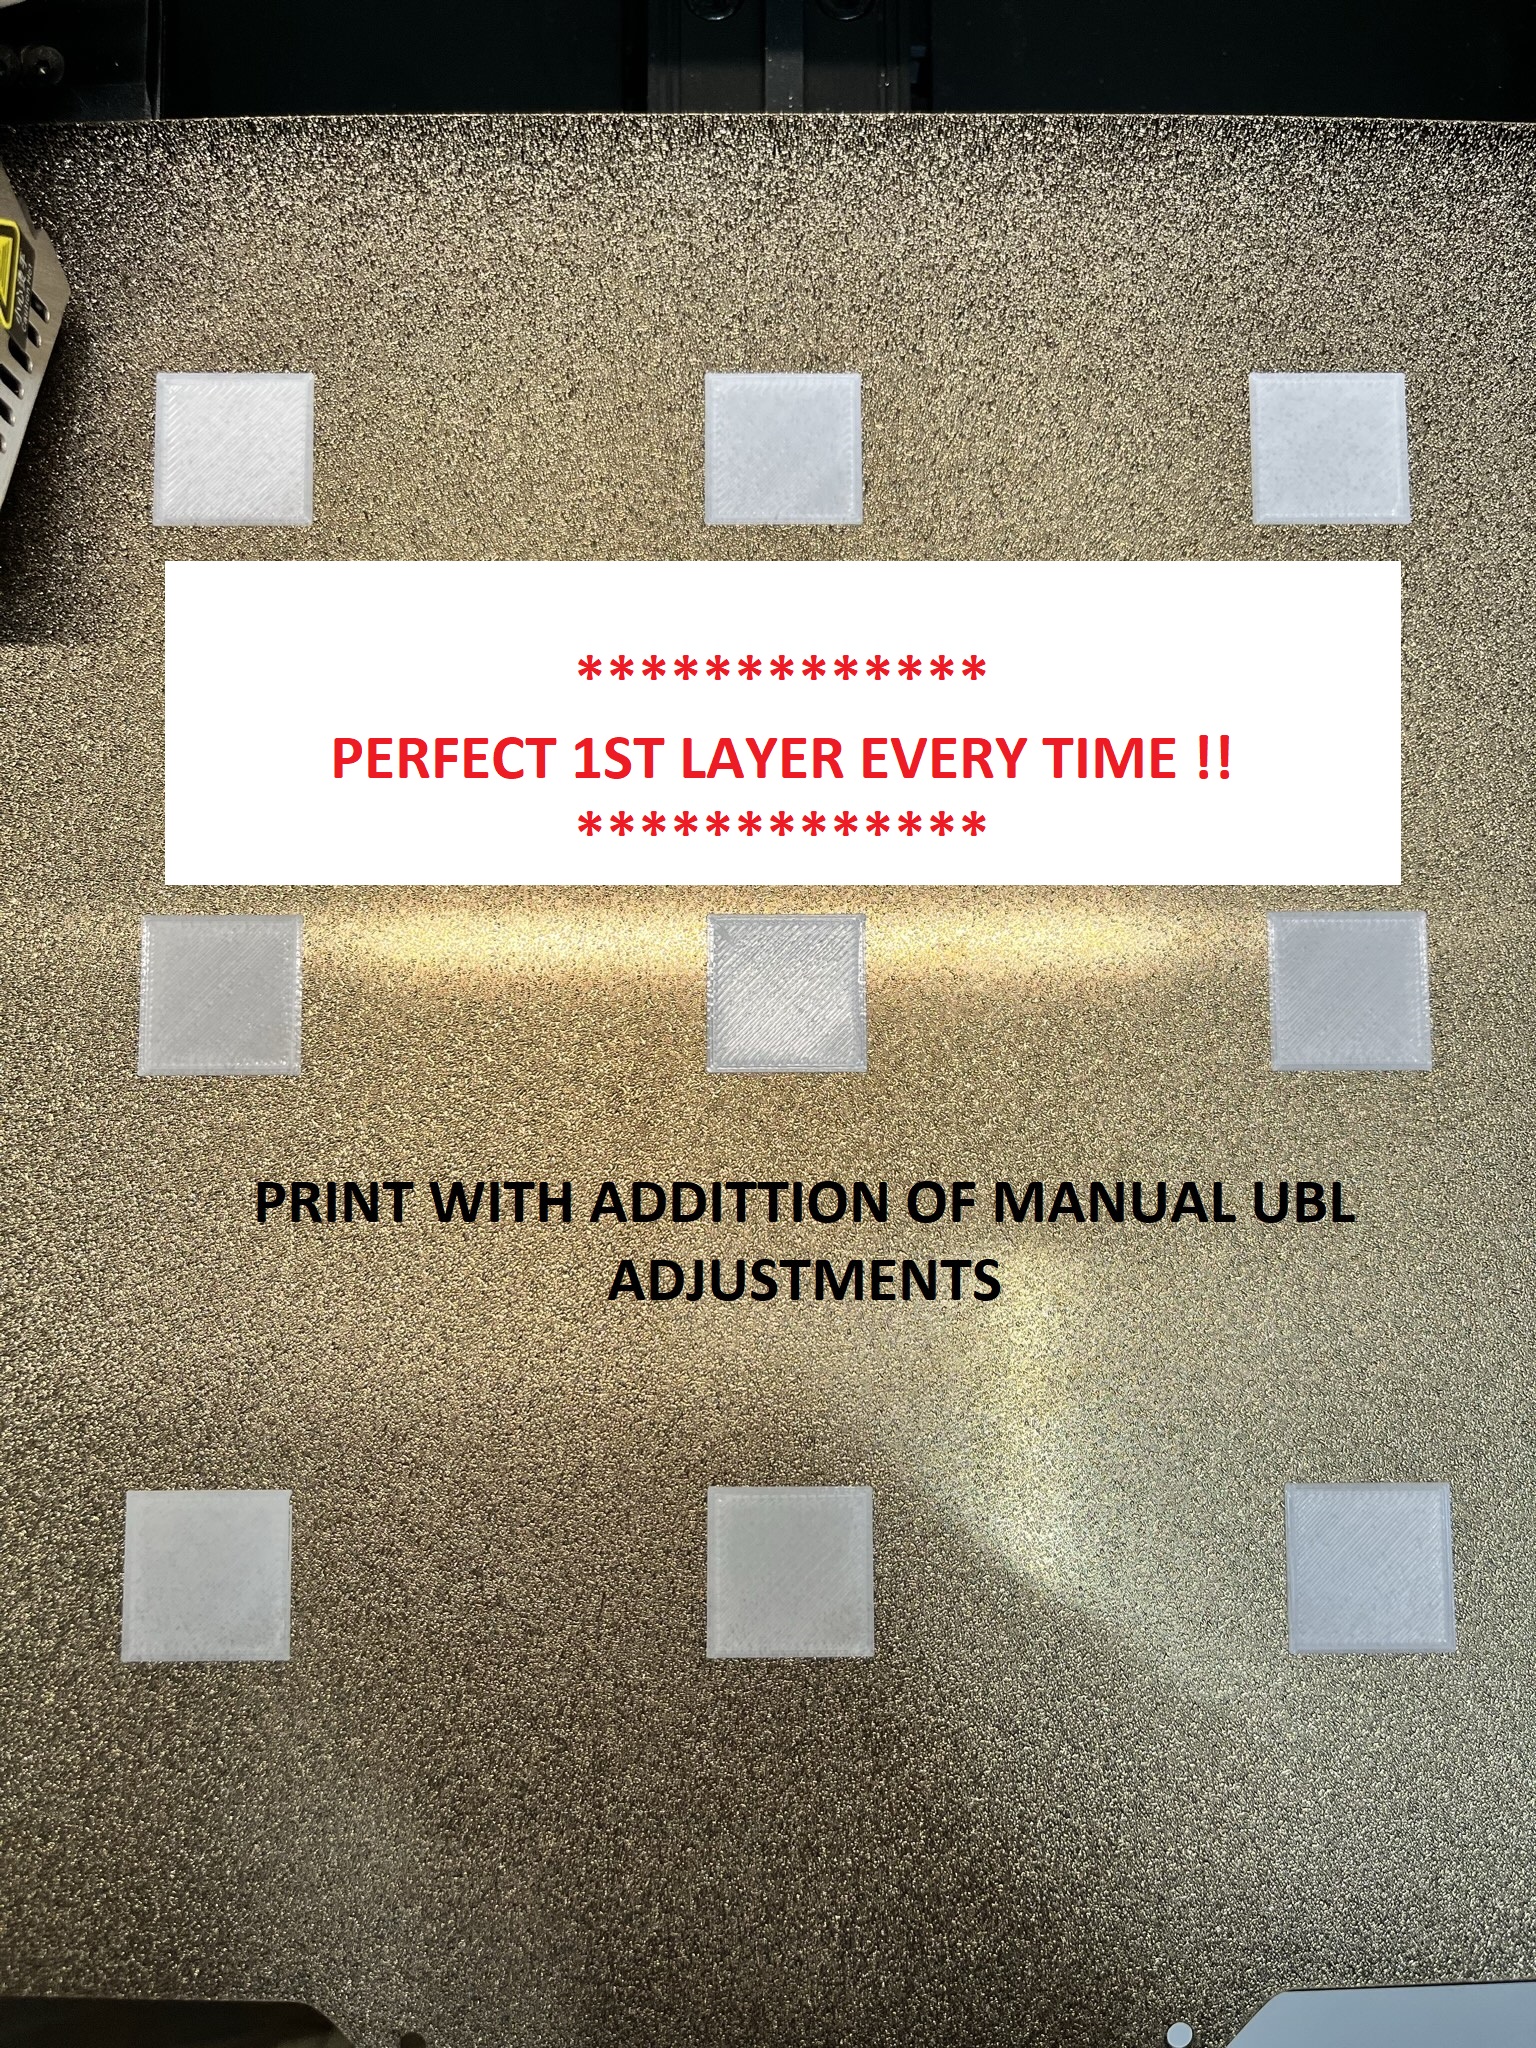 Perfect 1st layers! Ender 3 v2, Ender 3S1, Ender 3S1 Pro - 3x3 Calibration Bed Leveling Squares optimized for Professional firmware with UBL